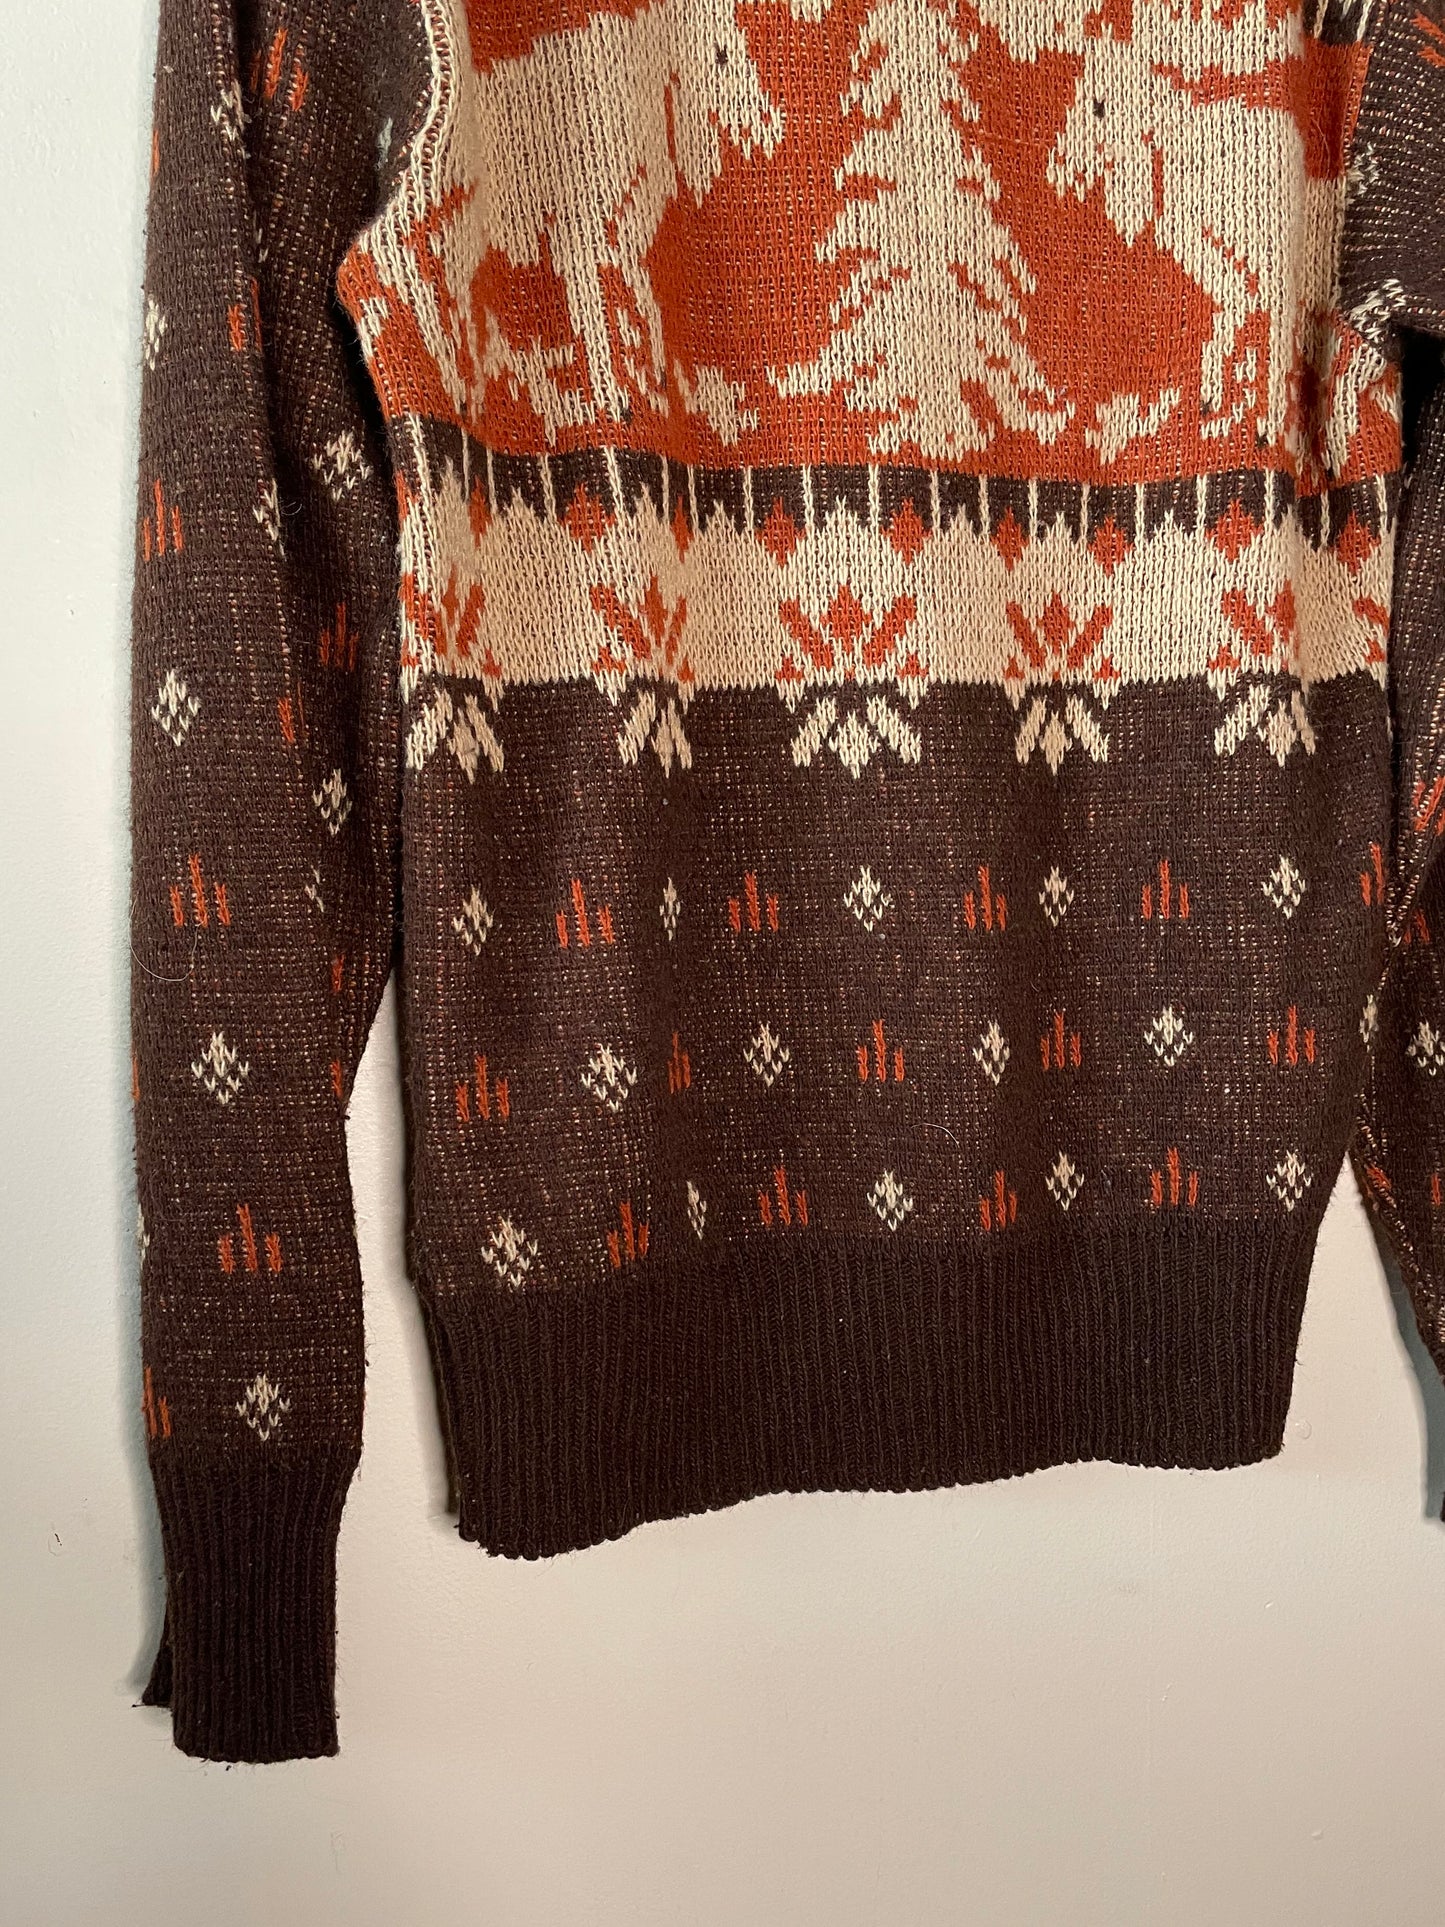 Crew Neck Knit Pullover Sweater with Moose Design